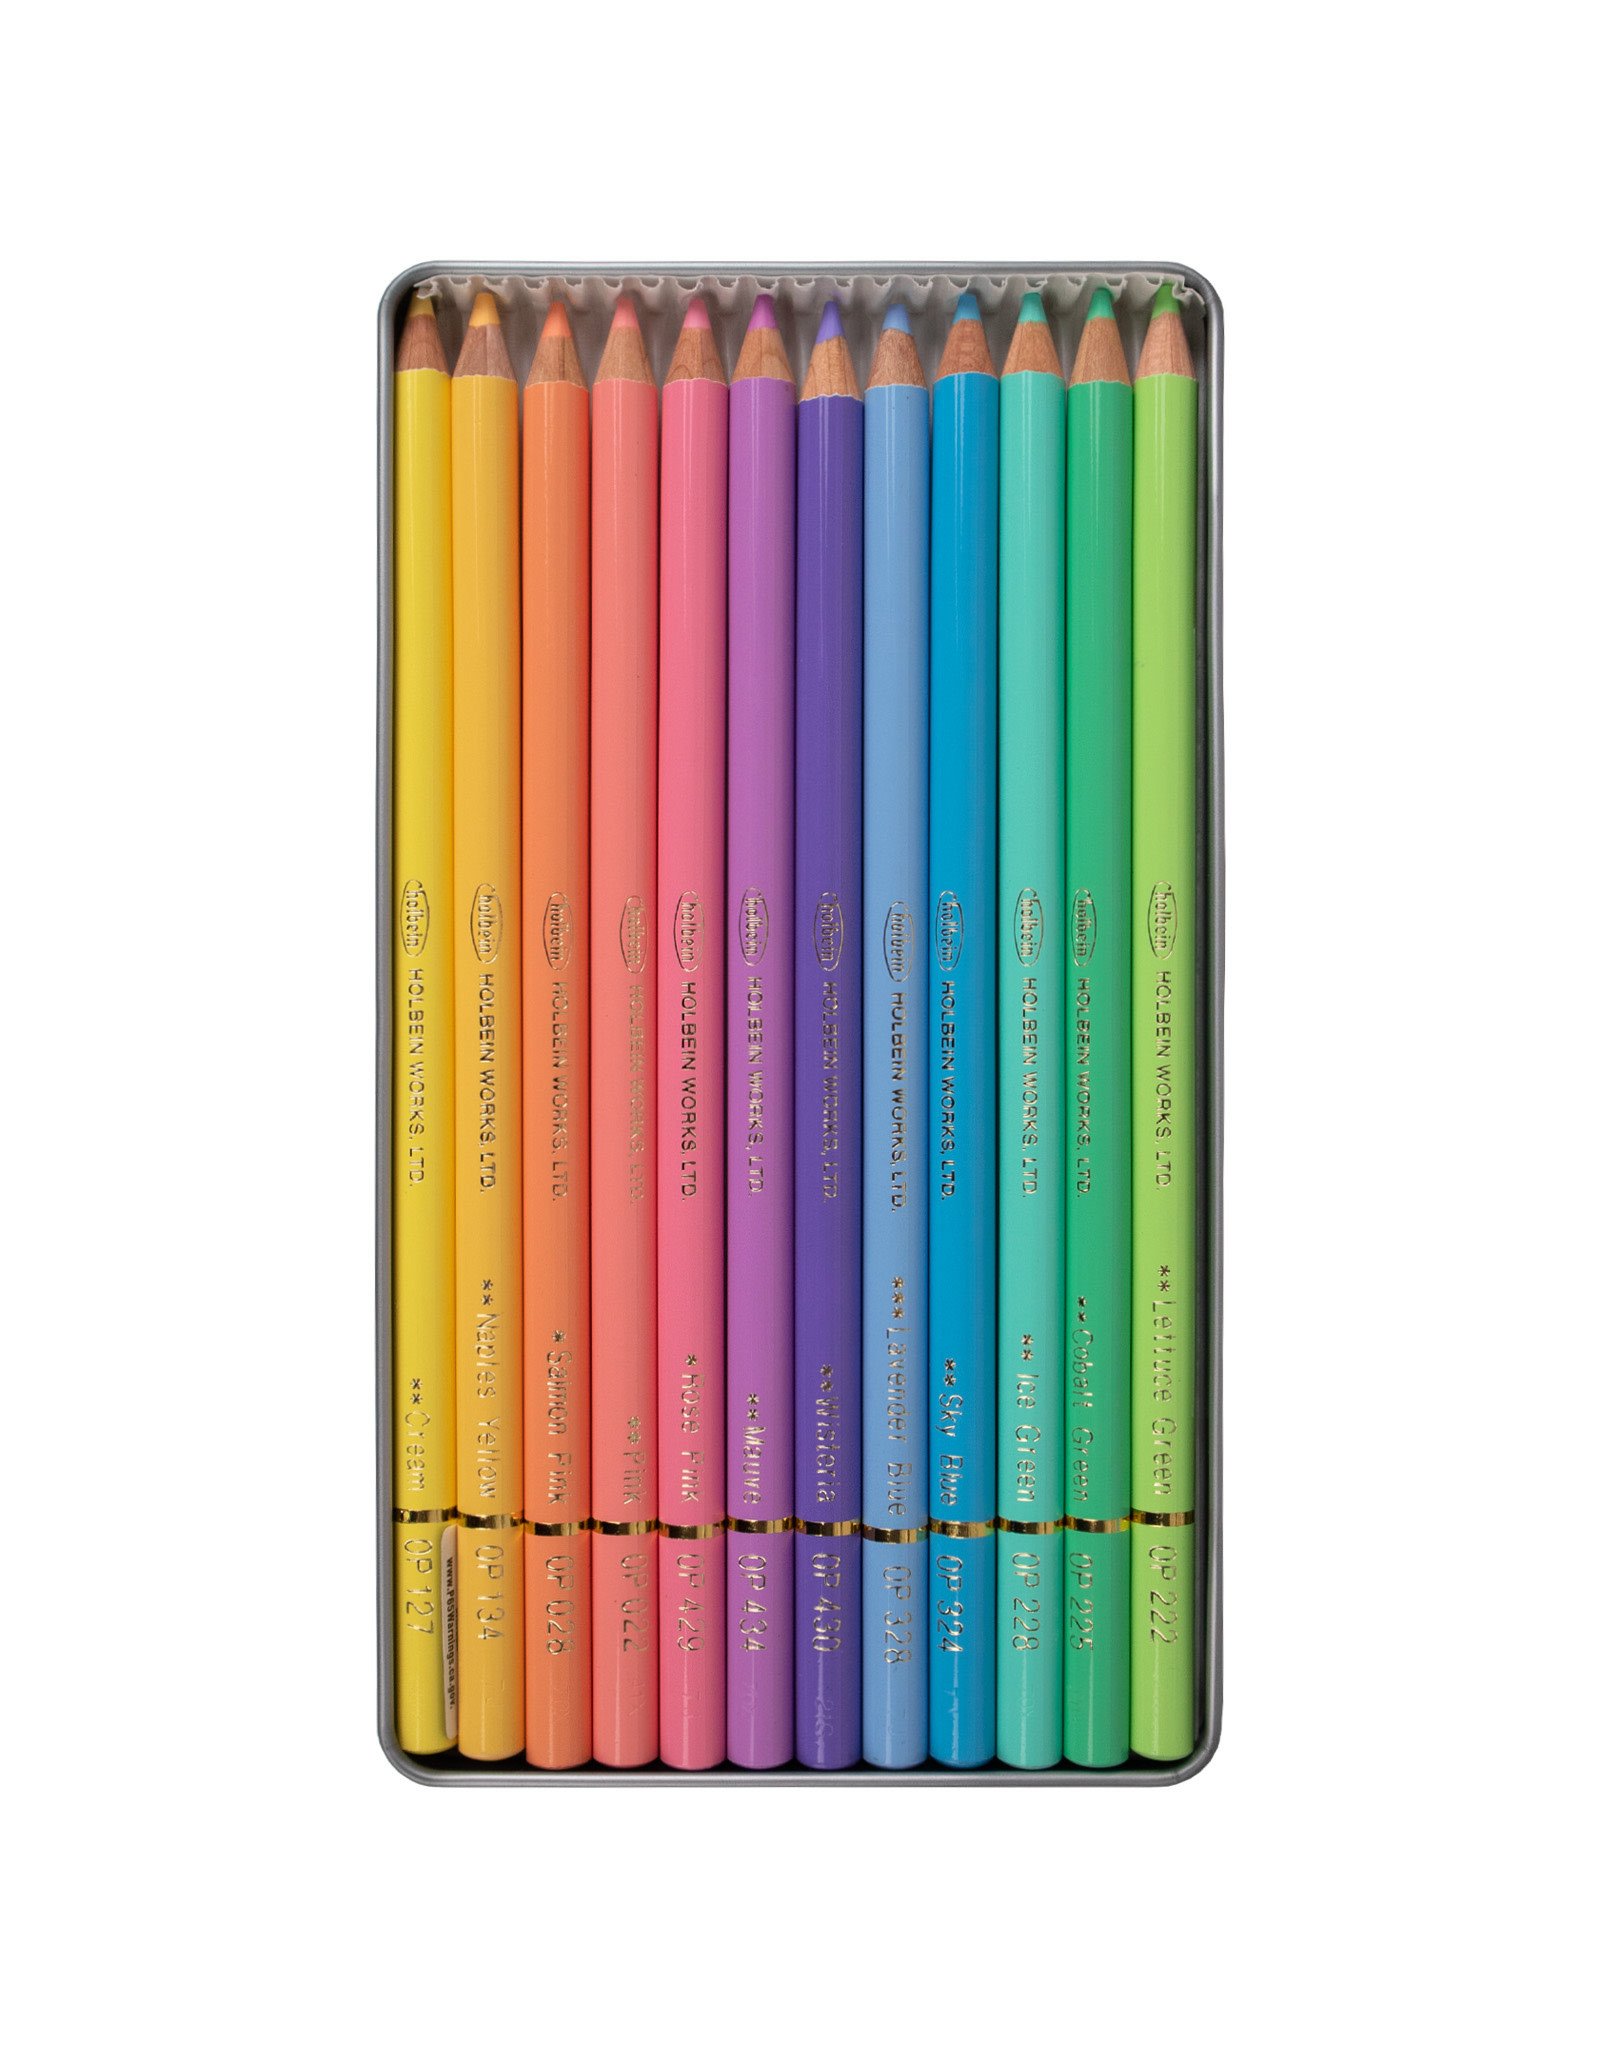 12-Color Double-Ended Manga Art Brush Pen Set - Perfect for Lettering,  Drawing, and Graffiti Art!